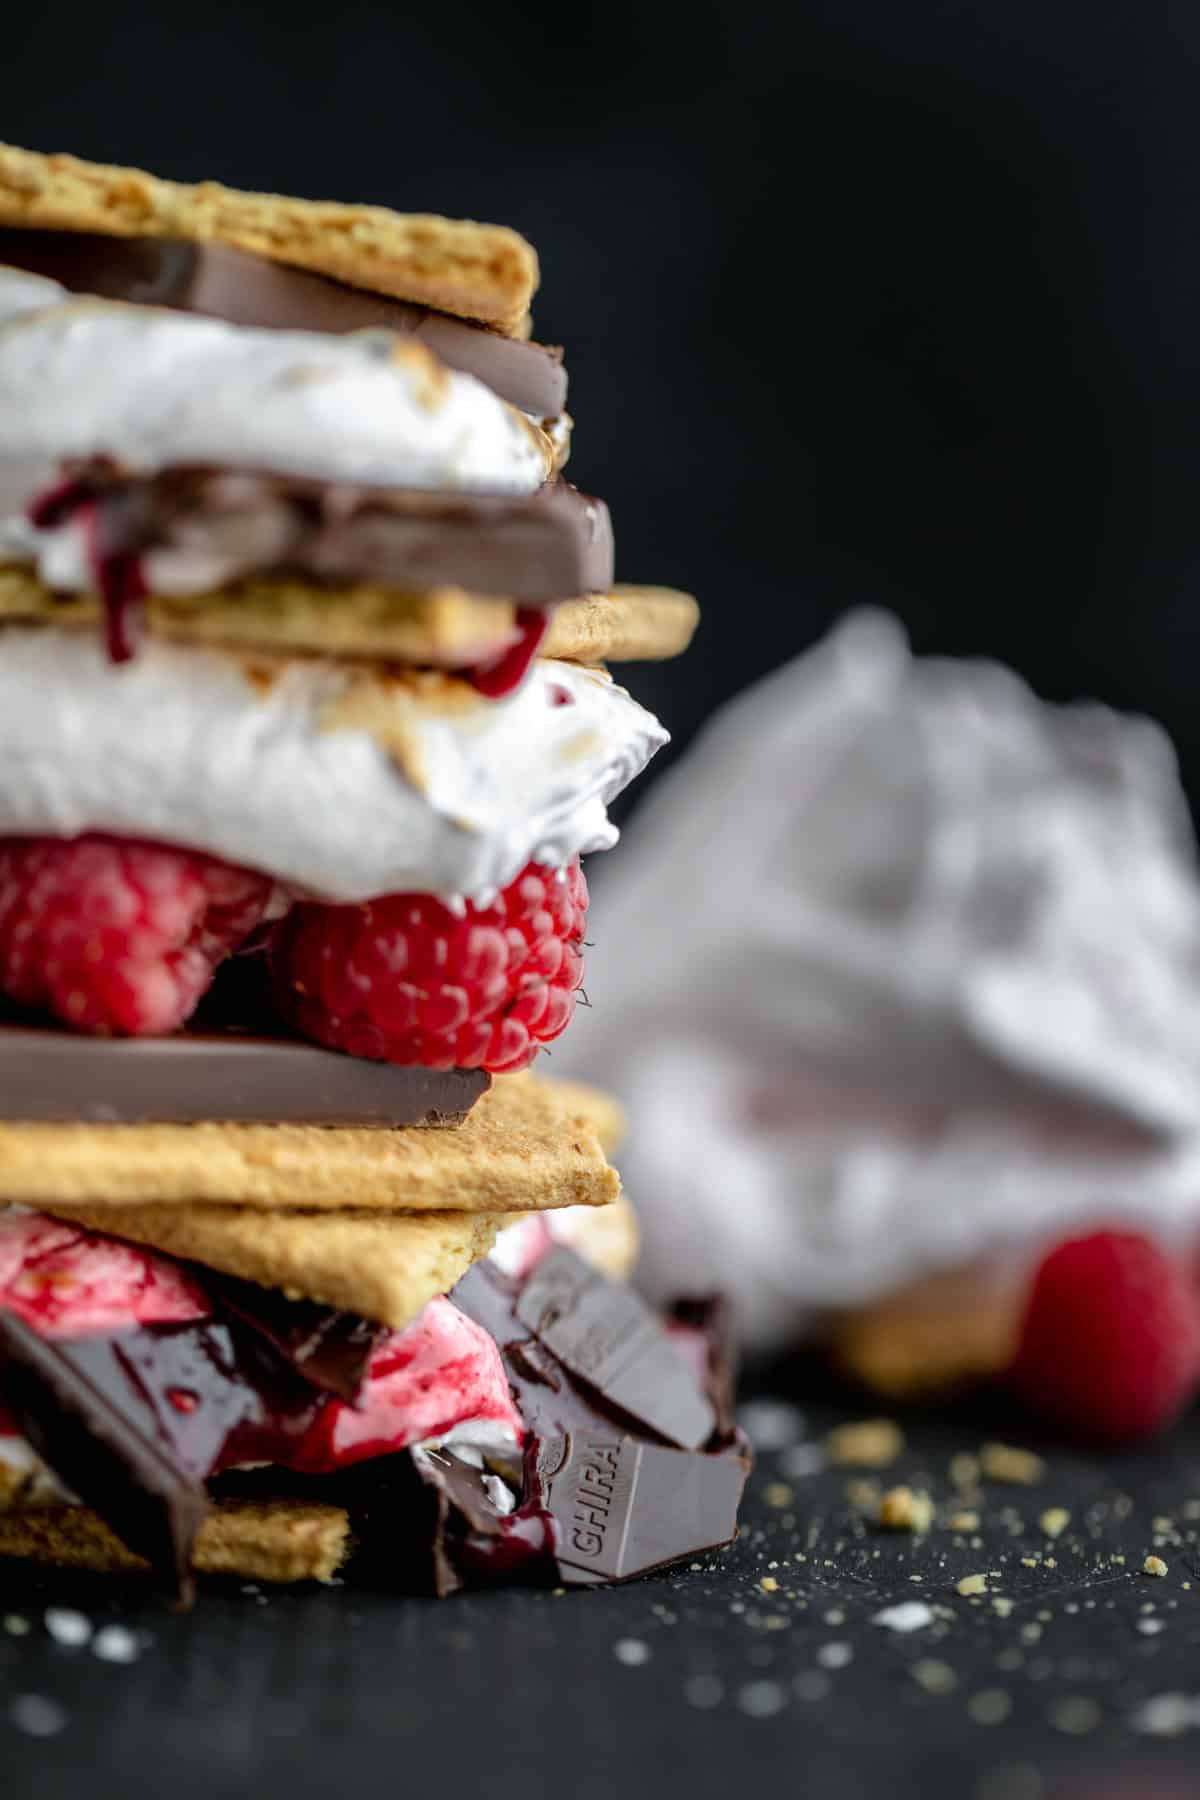 Raspberry S'mores with marshmallow fluff and Ghirardelli chocolate. 